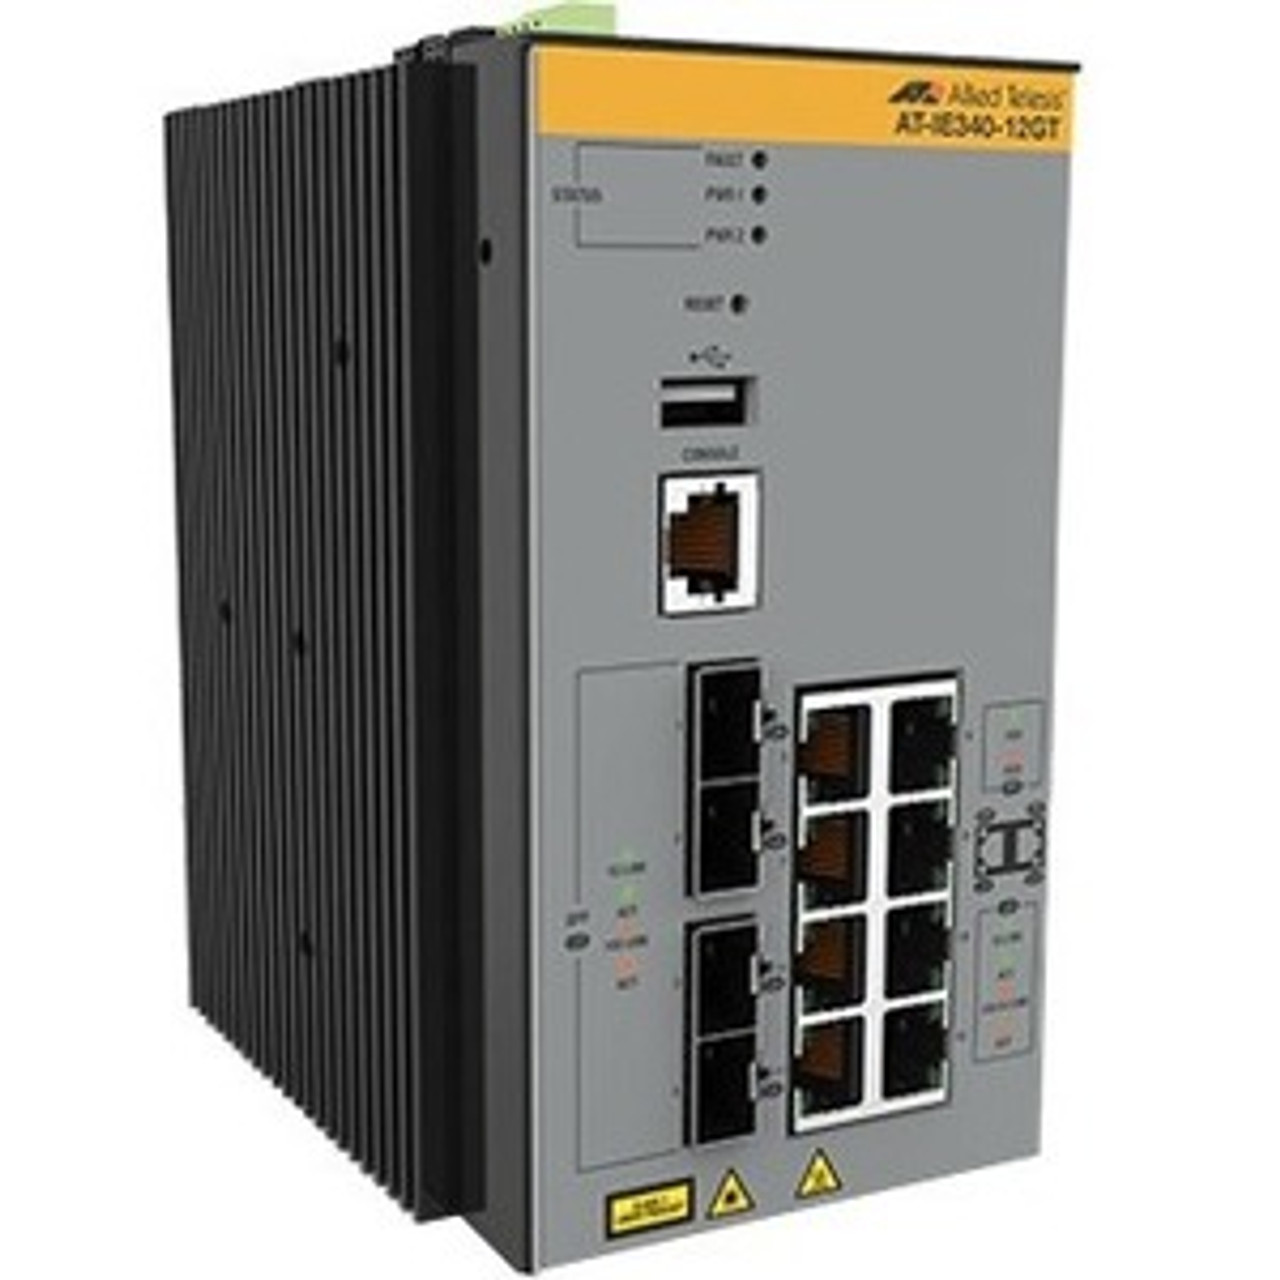 AT-IE340-12GP-80 Allied Telesis Industrial PoE+ Ethernet Layer 3 Switch - 8 Ports - Manageable - 3 Layer Supported - Modular - 4 SFP Slots - 271 W Power Consumption